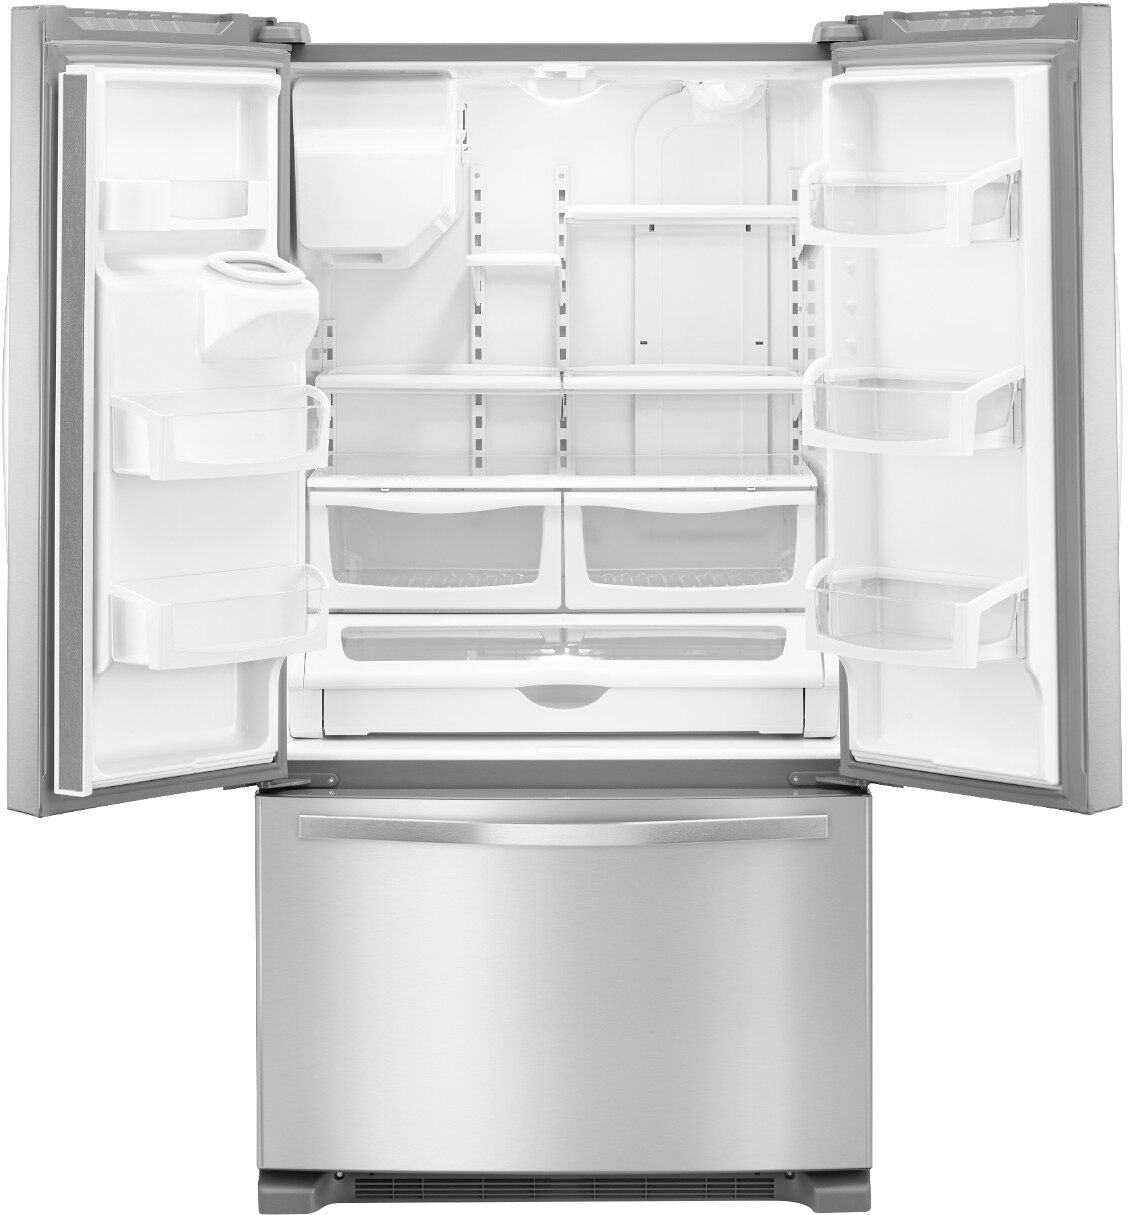 Angle View: Whirlpool - 24.7 Cu. Ft. French Door Refrigerator - Stainless Steel